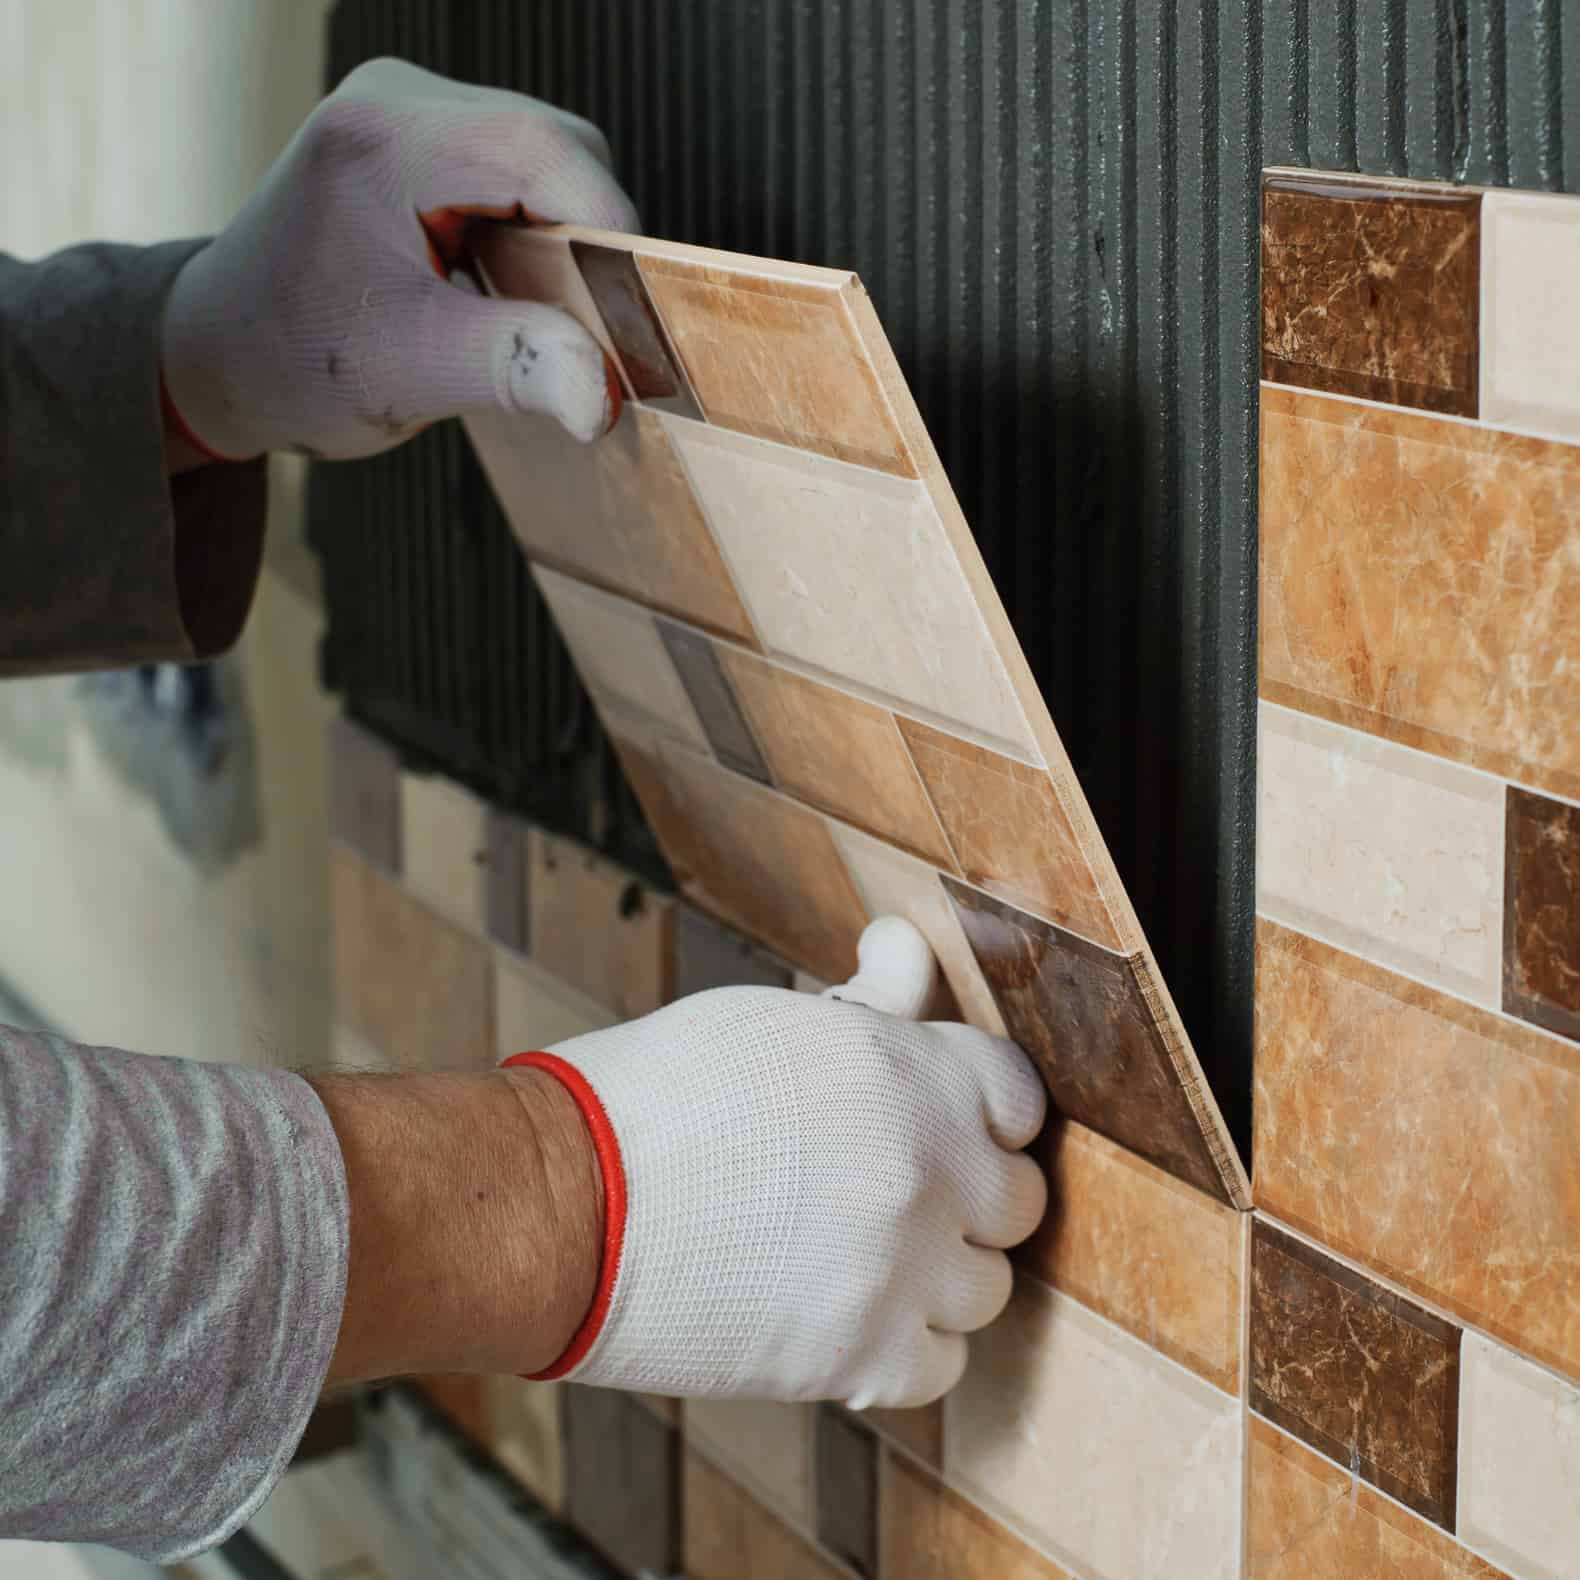 Worker setting multicolored tiles on the wall